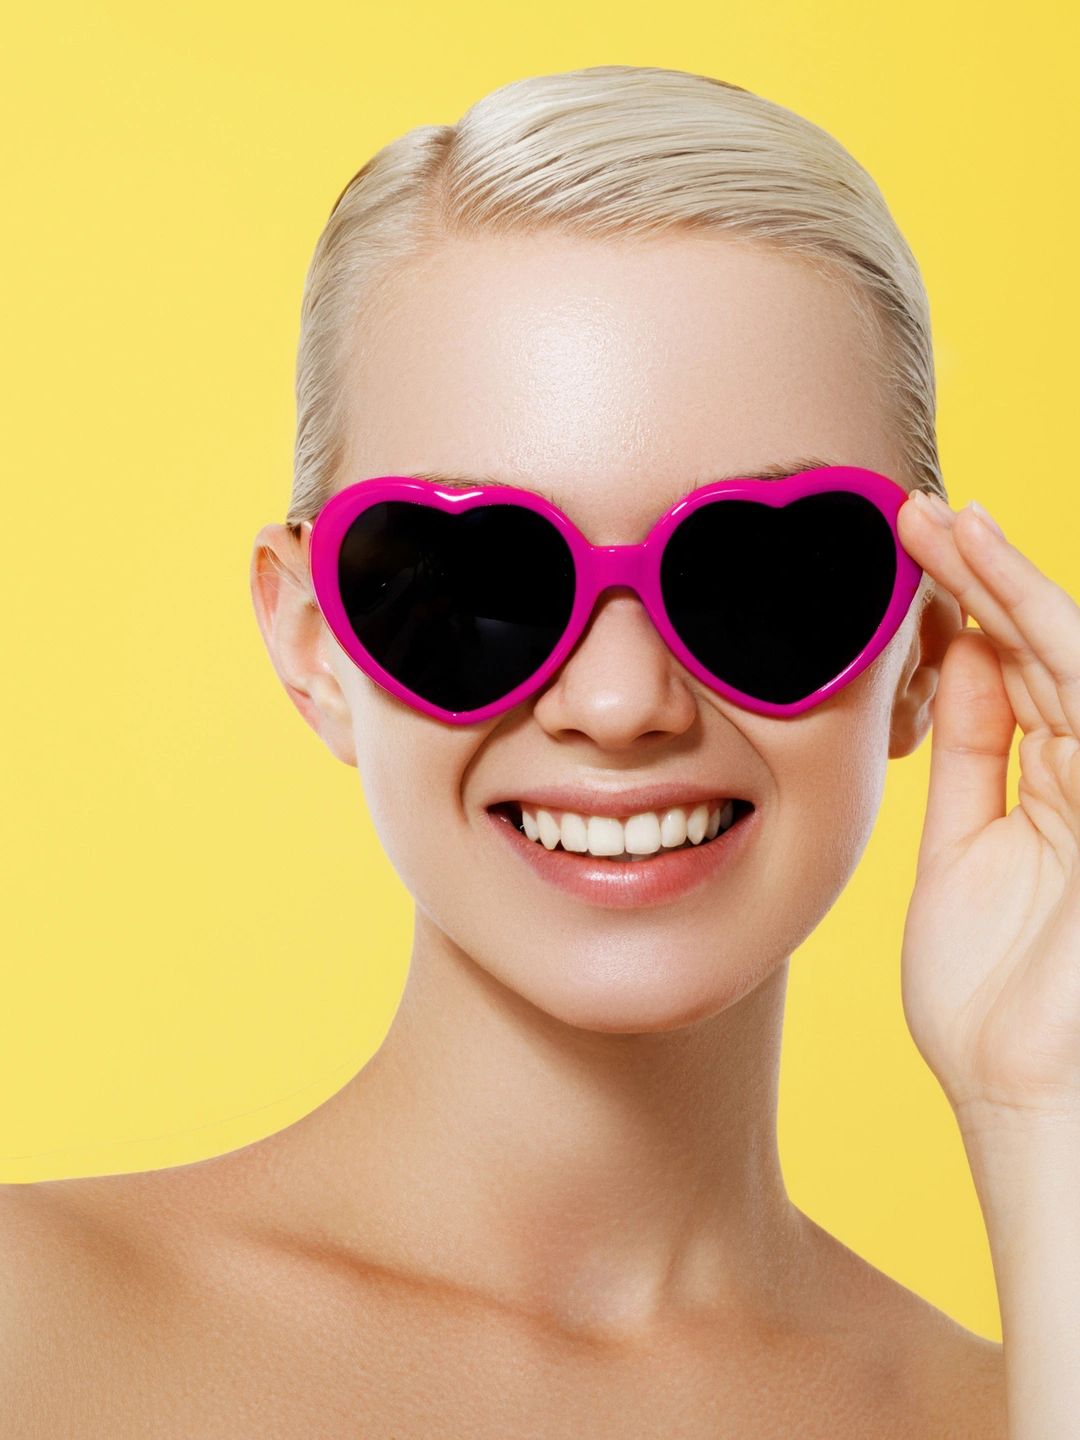 A woman with short blonde hair smiling on a yellow background. Wearing heart shaped pink sunglasses.